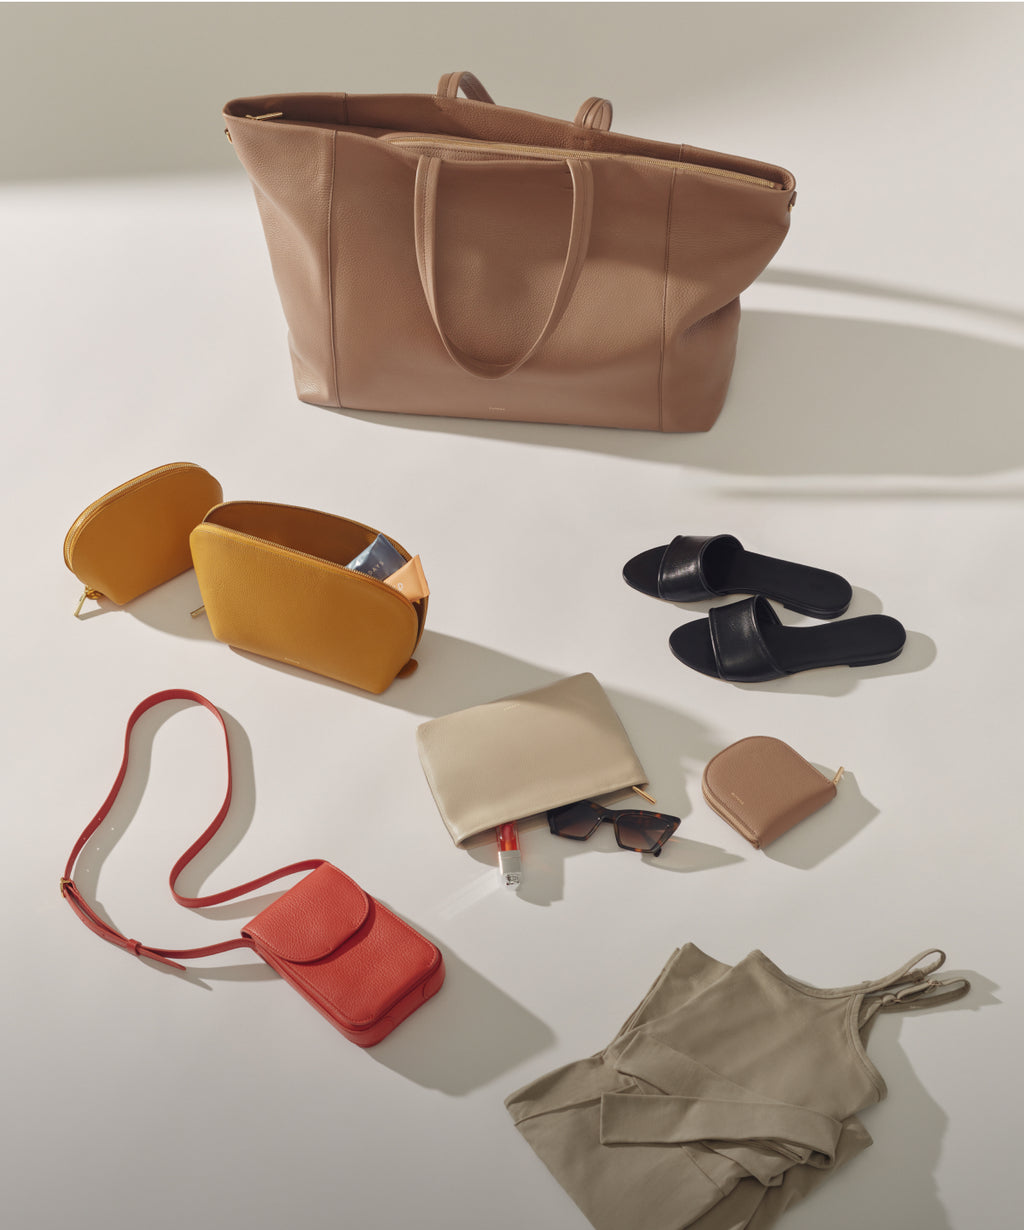 Cuyana Easy Travel Tote in color Cappuccino (top), folded clothing and leather accessories in sage, yellow, red, beige, and black. 